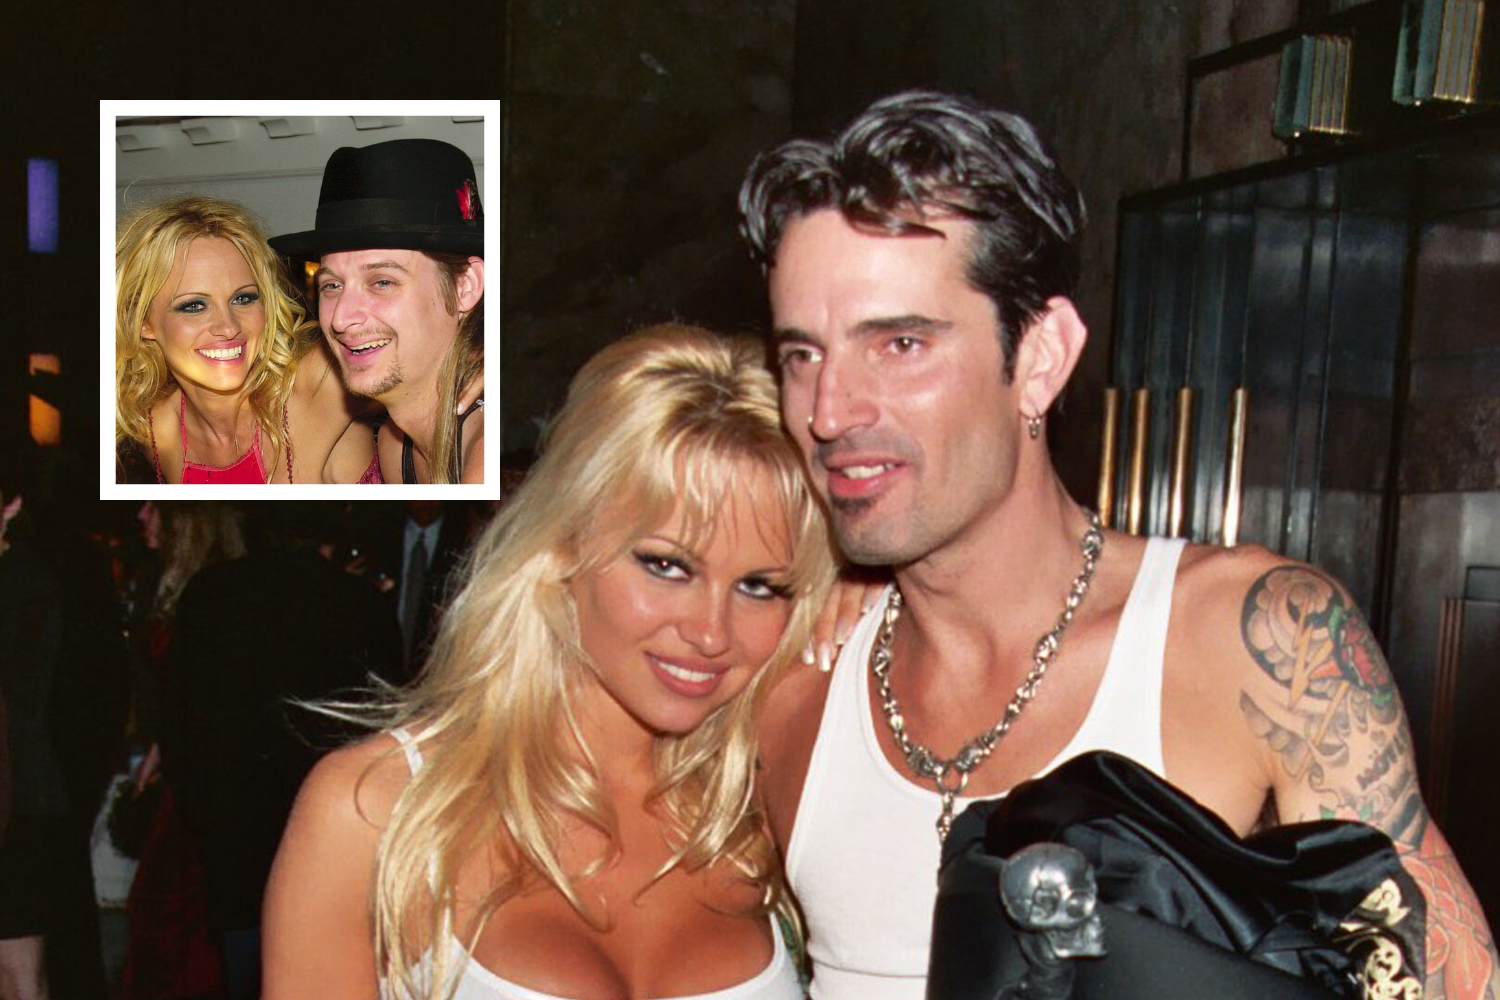 Pamela Anderson on Her Four Ex-Husbands The Good, the Bad and the Ugly pic